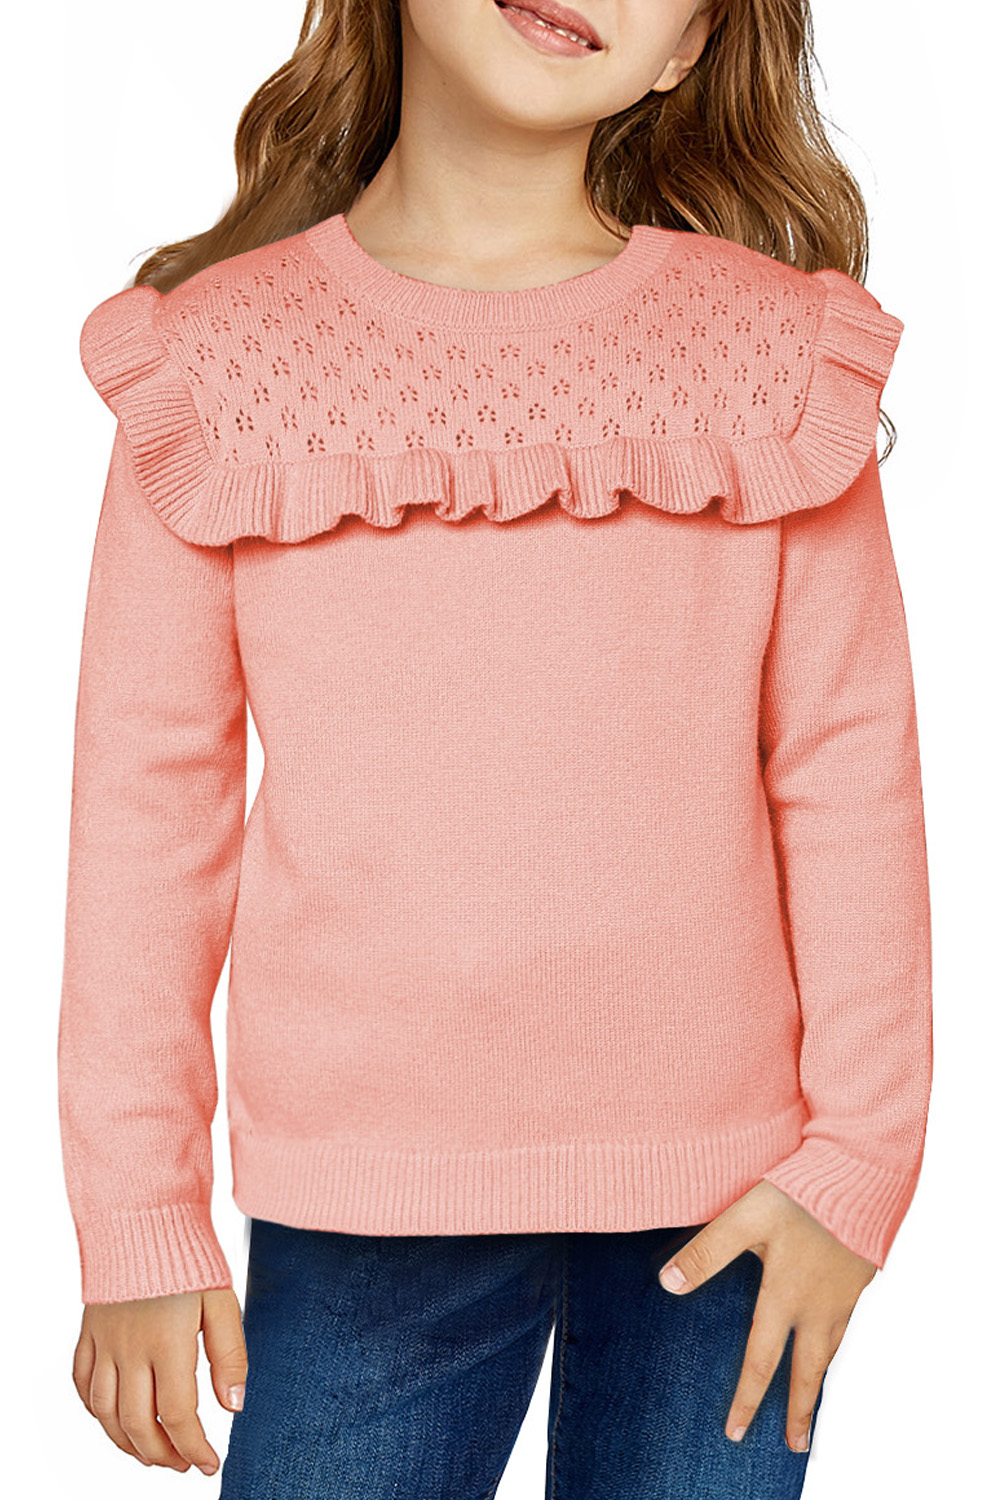 Stockpapa 5 Color Girls Softtouch Sweaters Outlet Online